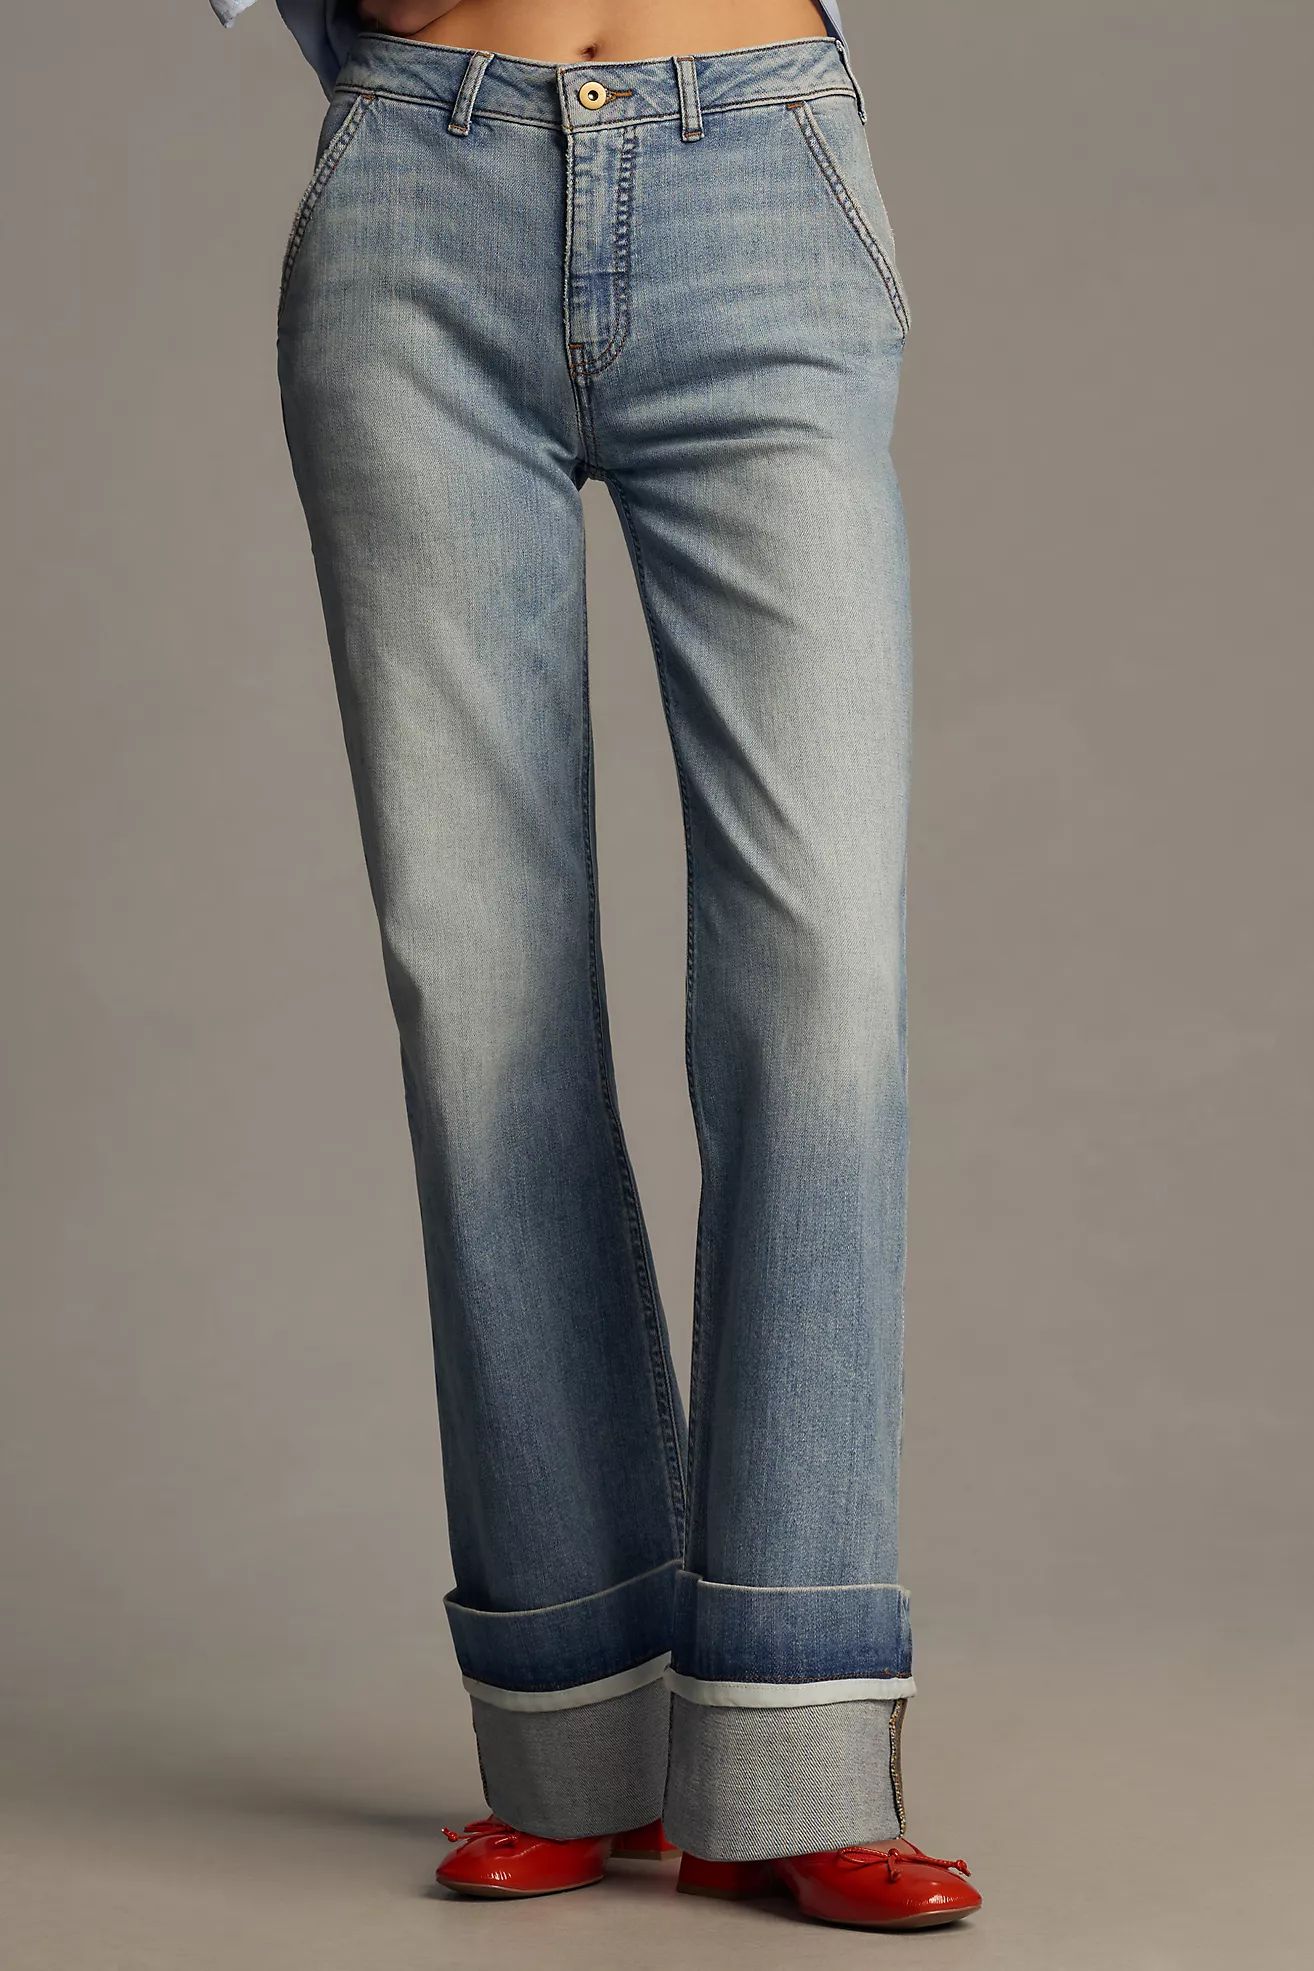 Pilcro Francais Mid-Rise Cuffed Jeans | Anthropologie (US)